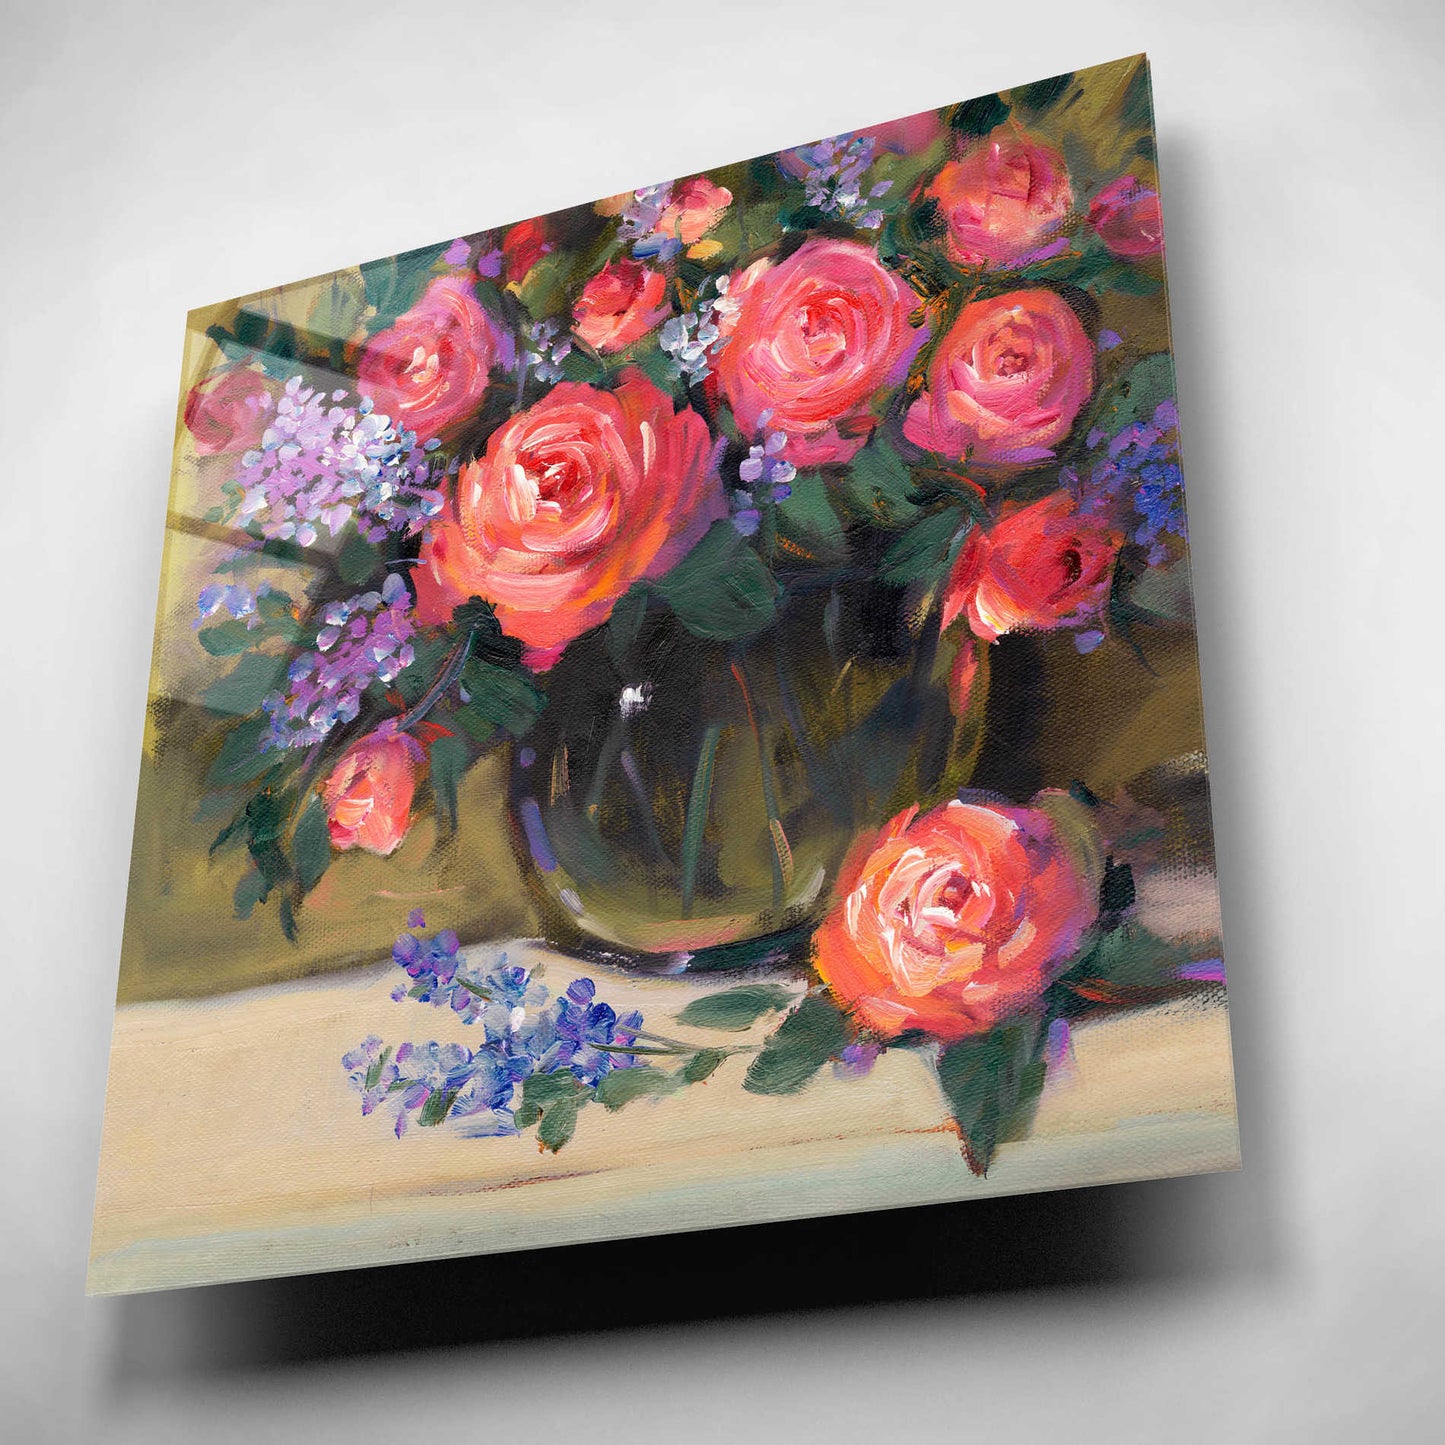 Epic Art 'Floral Still Life I' by Tim O'Toole, Acrylic Glass Wall Art,12x12